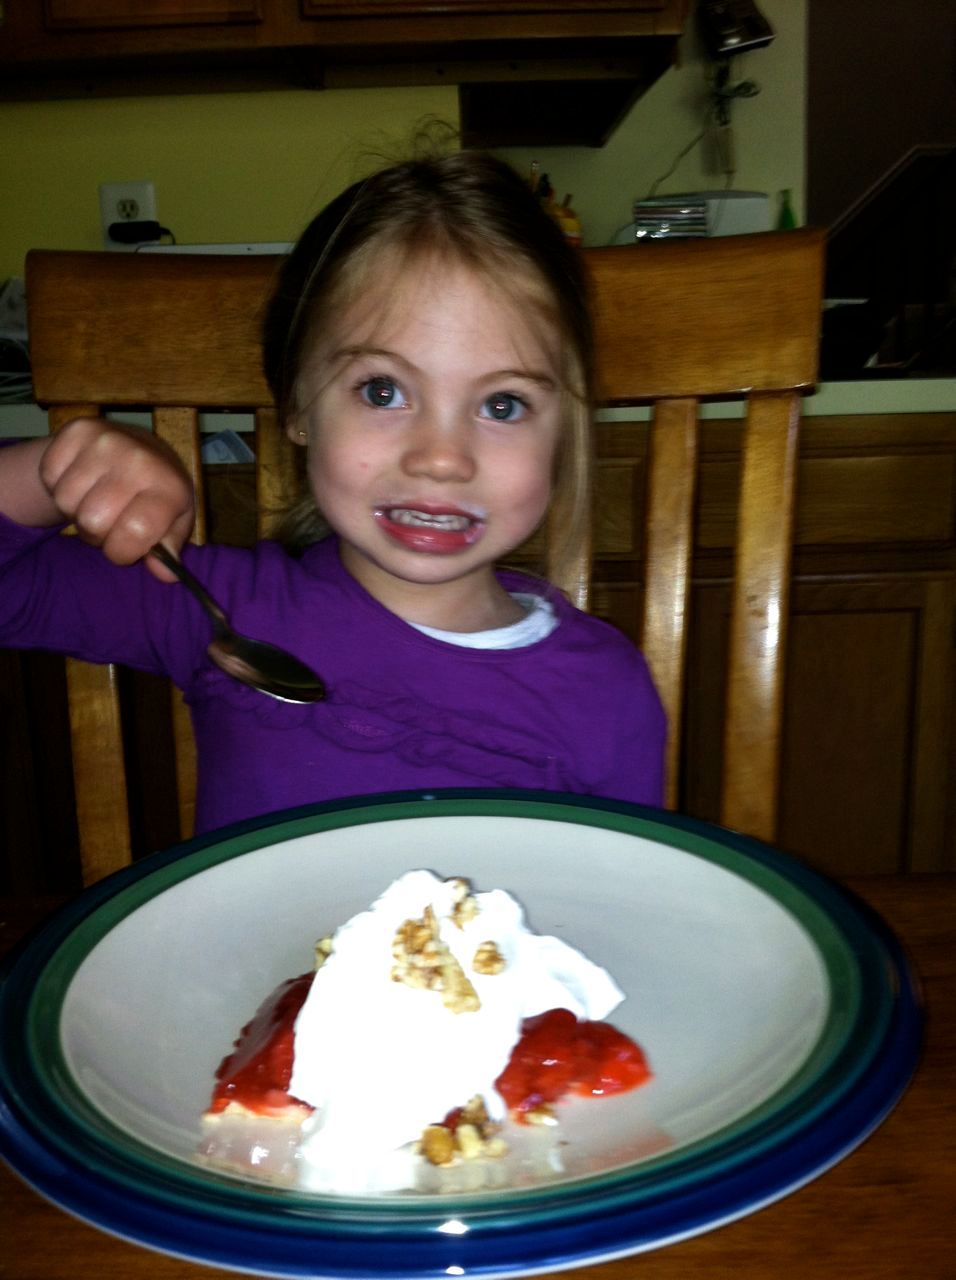  Buggy eating her favorite fruit in pie form. 